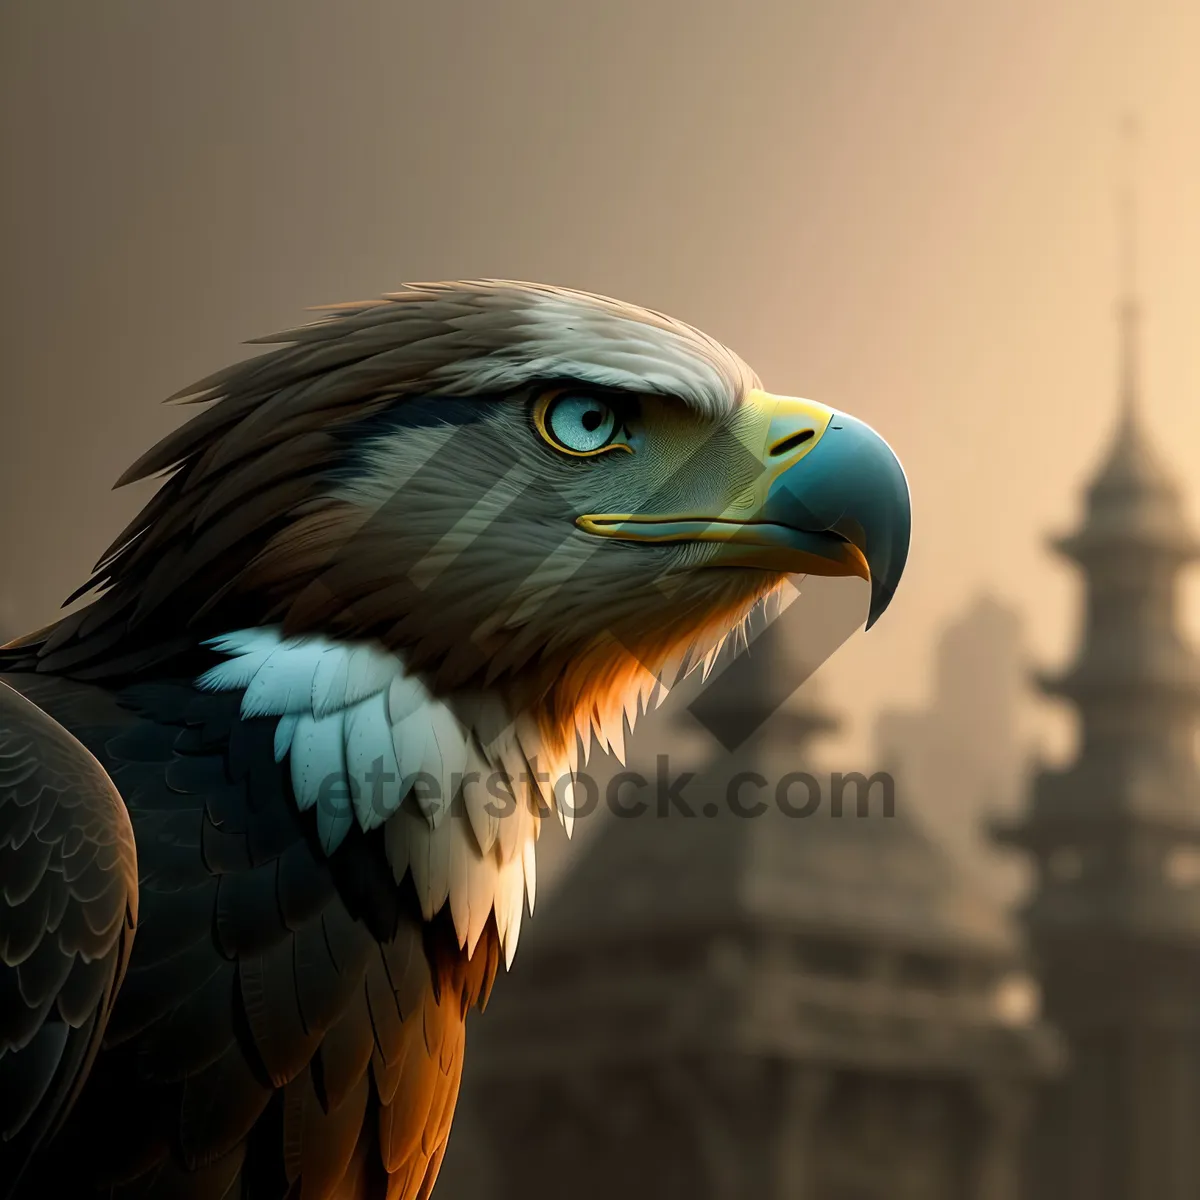 Picture of Wild Hunter: Majestic Bald Eagle Soaring with Sharp Gaze